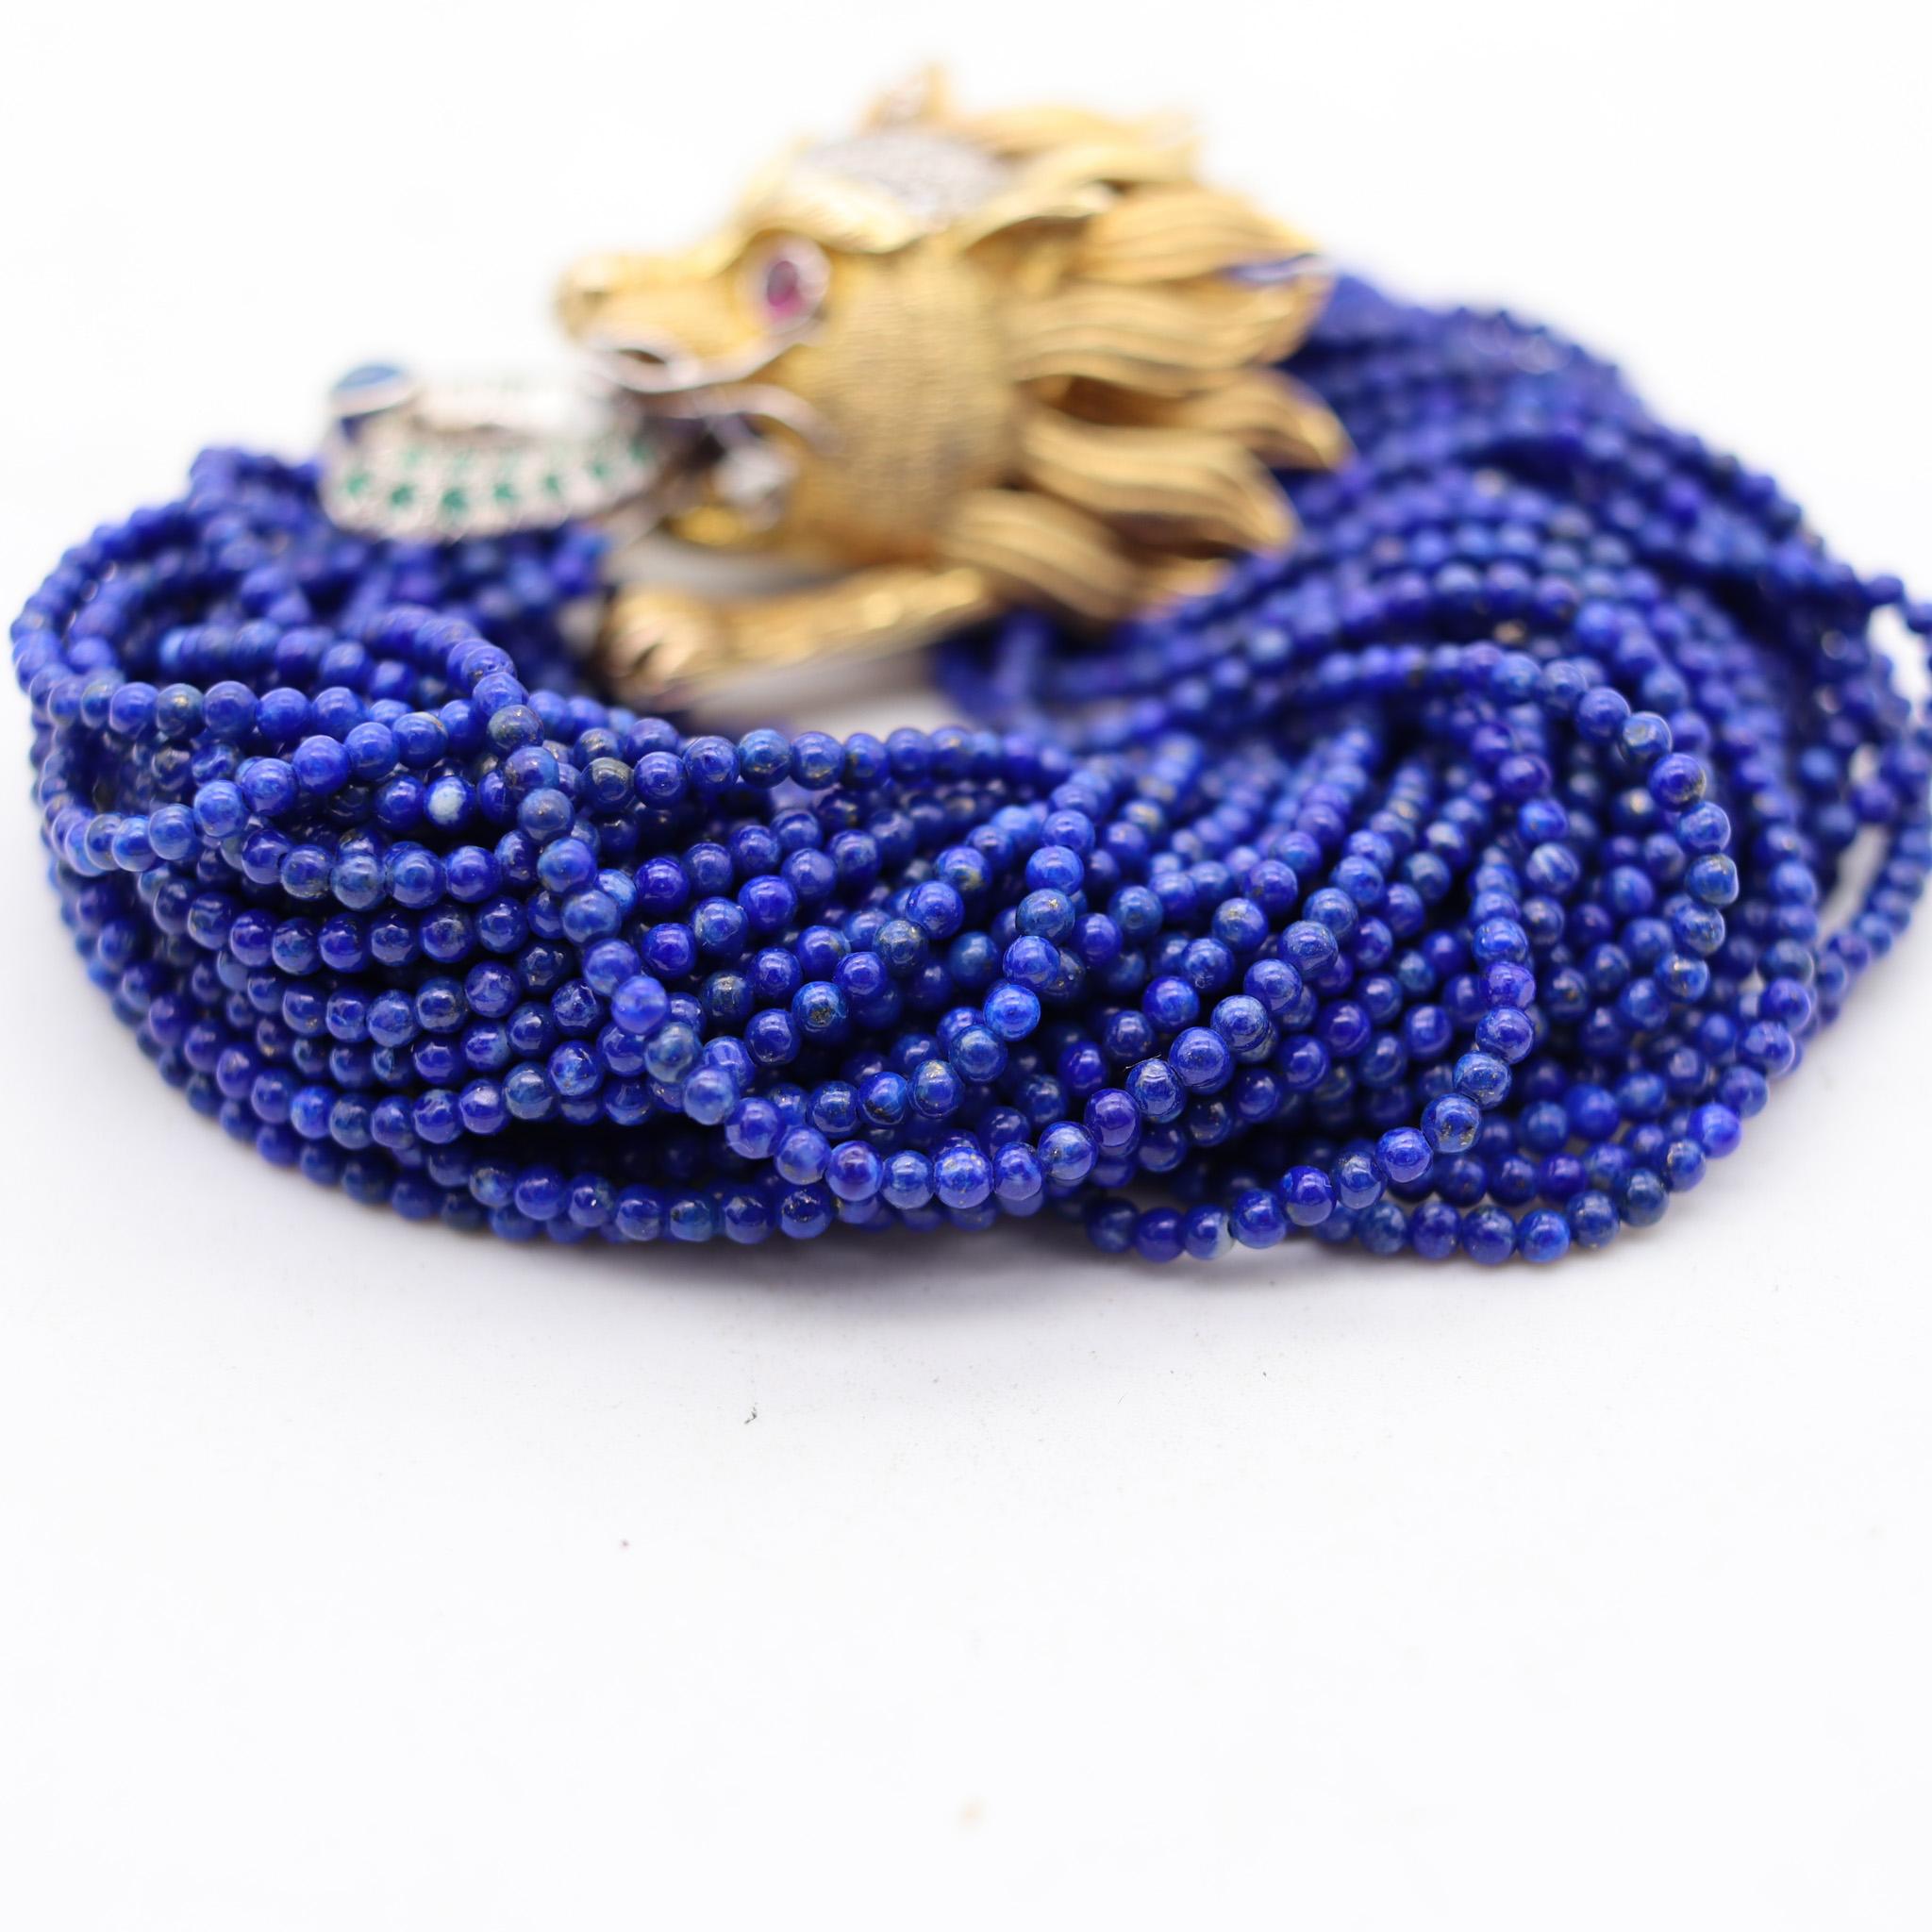 Modernist Chinoiserie Lapis Bracelet In 18Kt Gold With 2.17 Ctw Diamonds Emeralds & Rubies